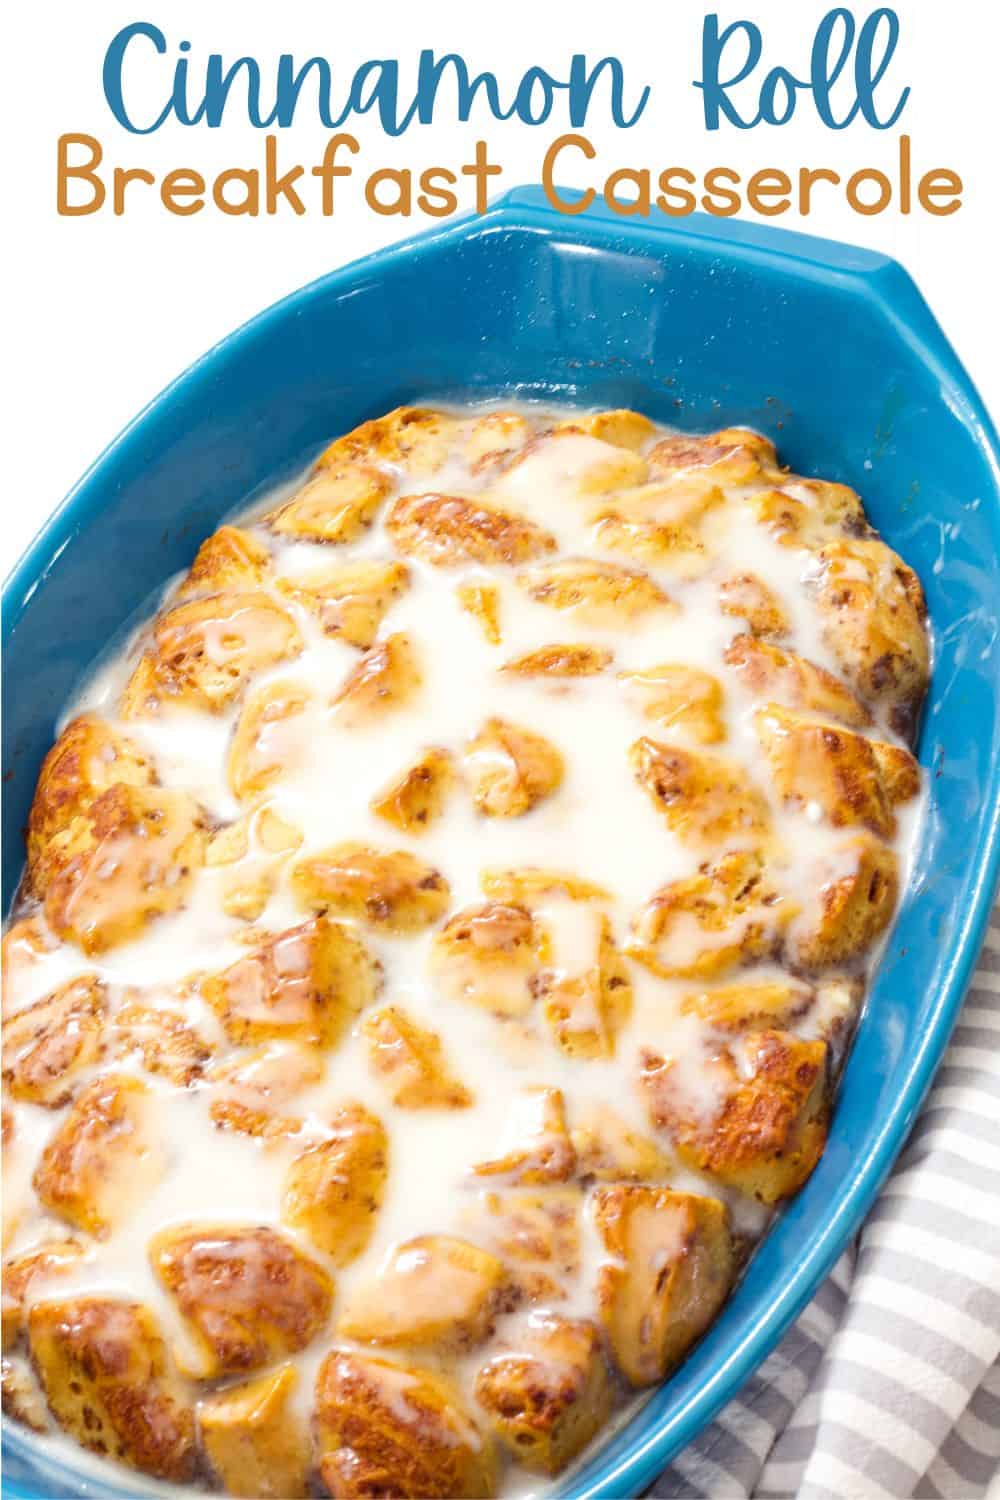 Very close up shot of the whole uncut cinnamon roll breakfast casserole in a blue baking dish.